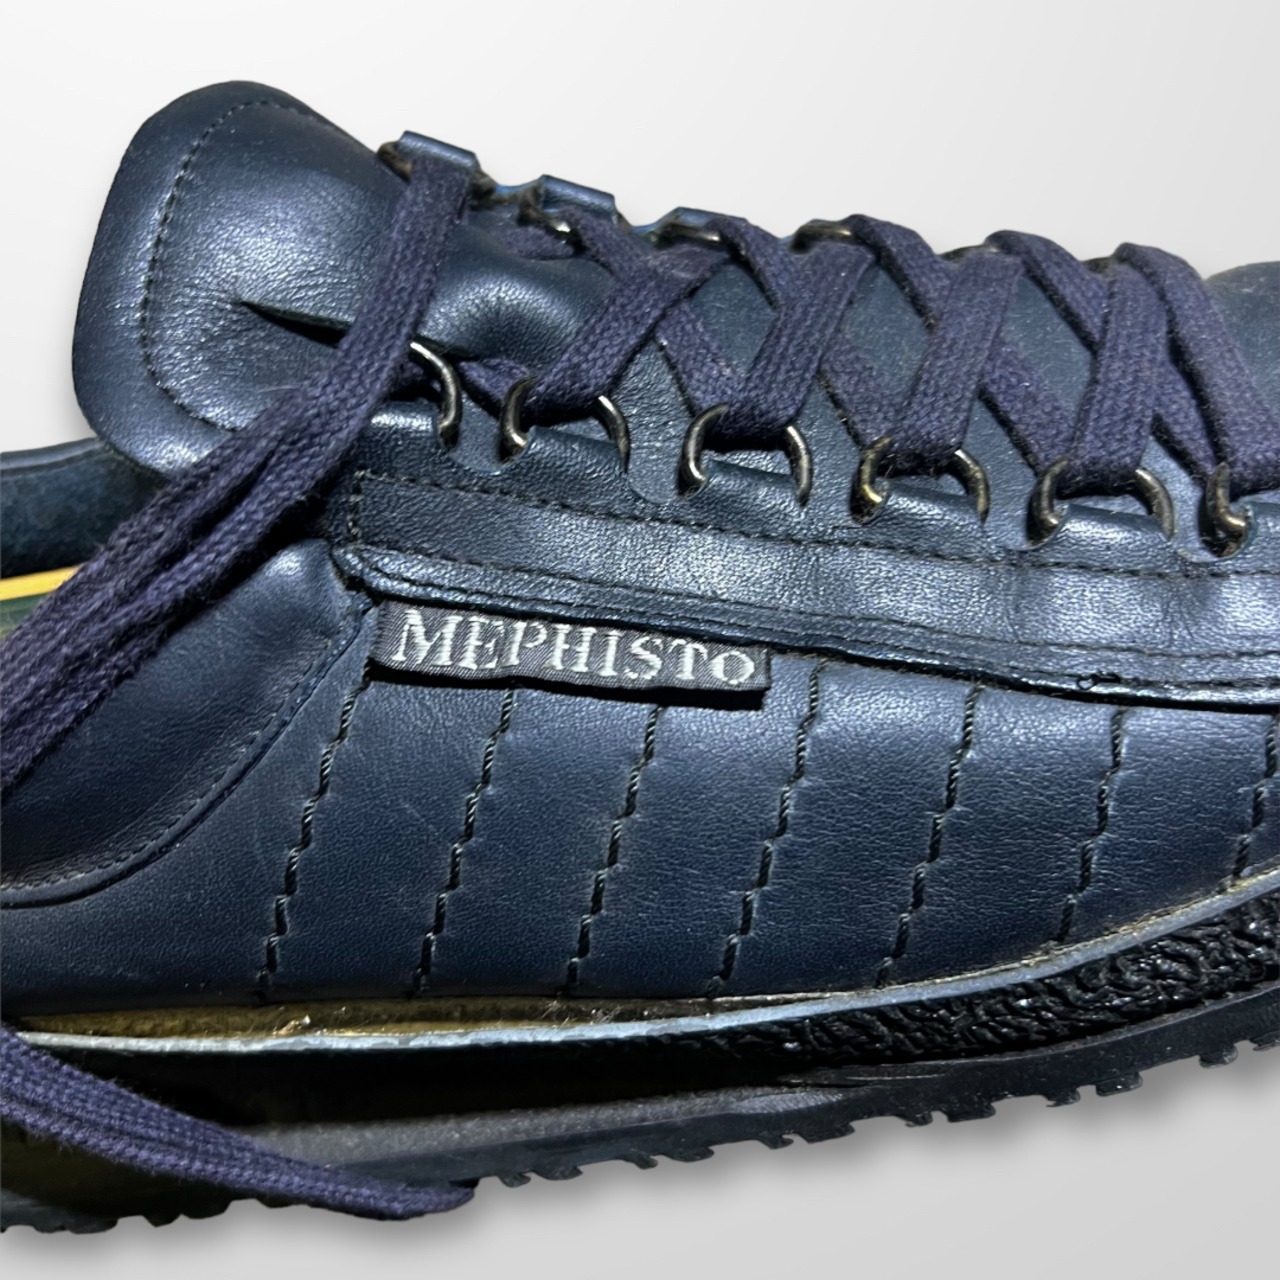 "Made in France" 2000s Mephisto Cruiser Walking Shoes